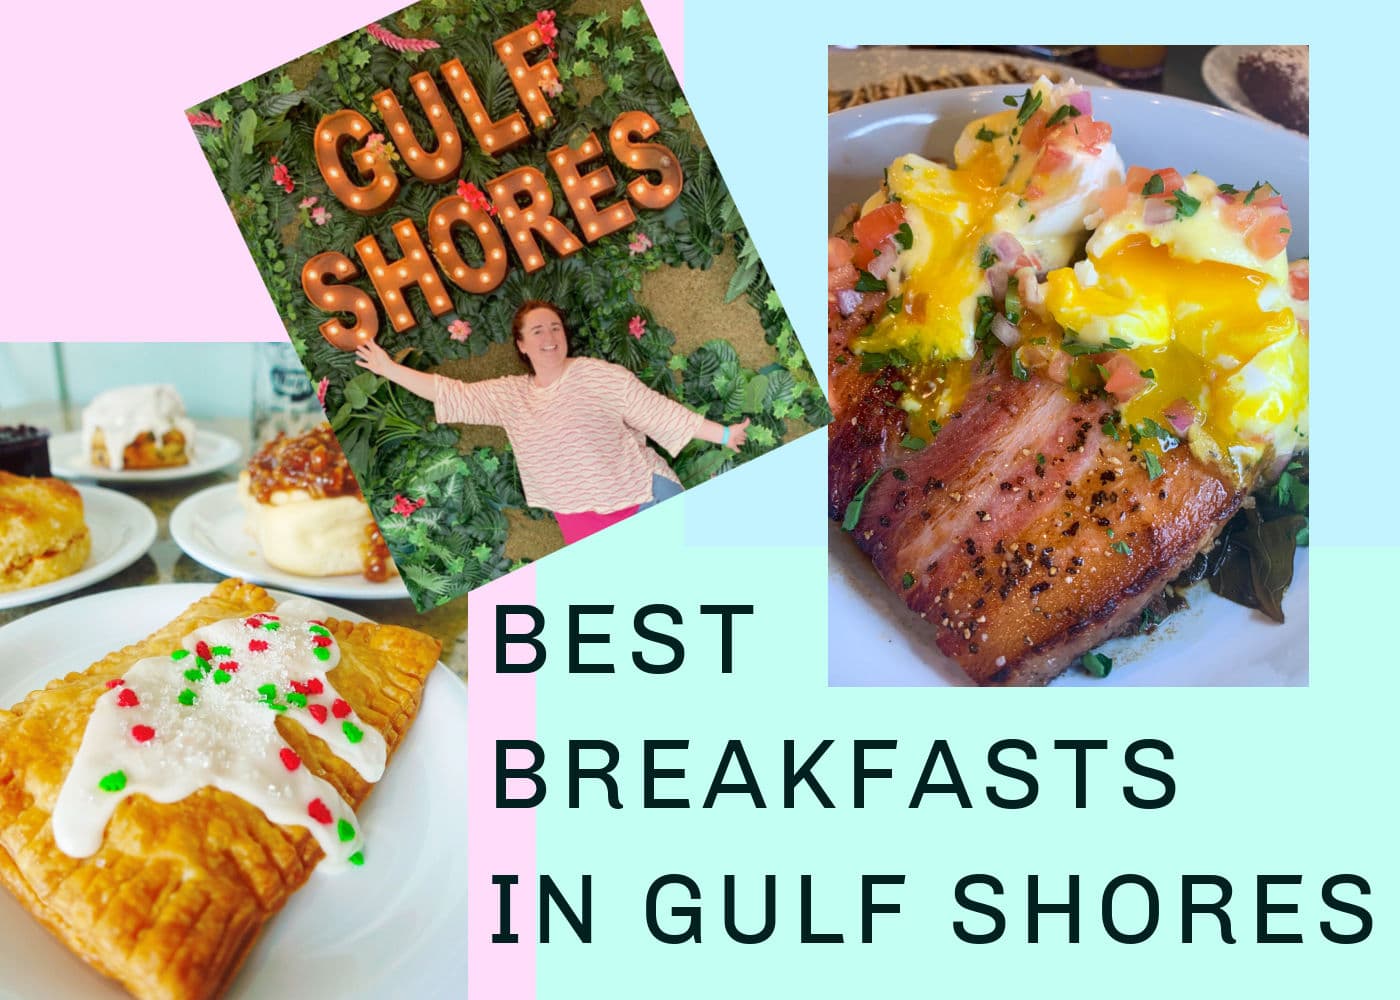 Best Breakfasts in Gulf Shores - The Food Hussy